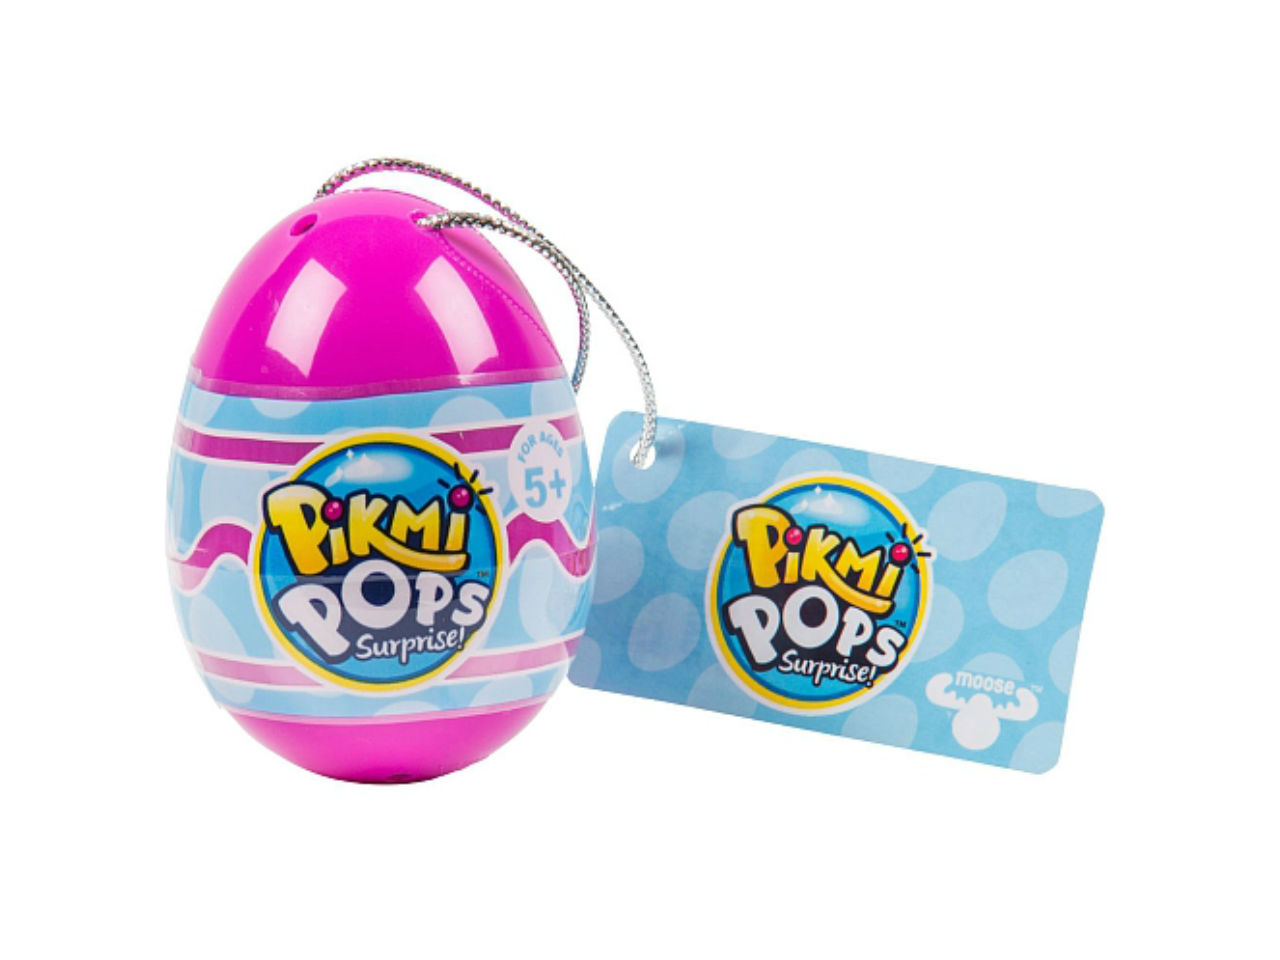 easter gifts for children